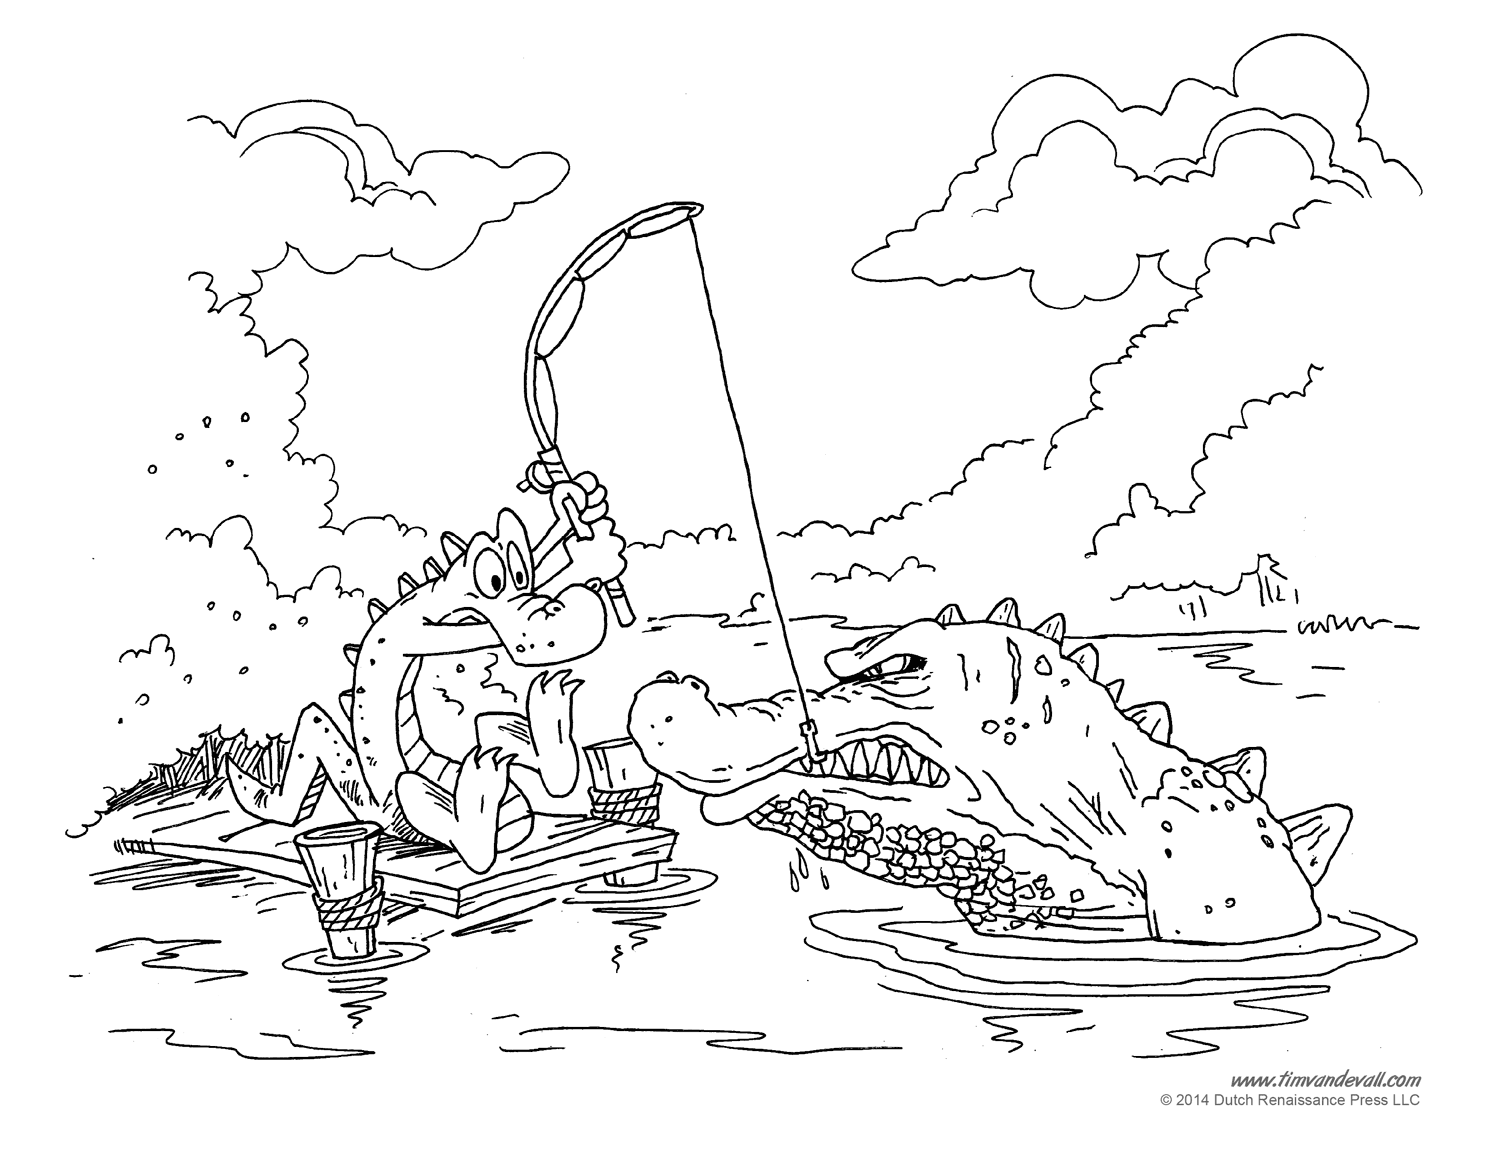 Alligator coloring pages â tims printables